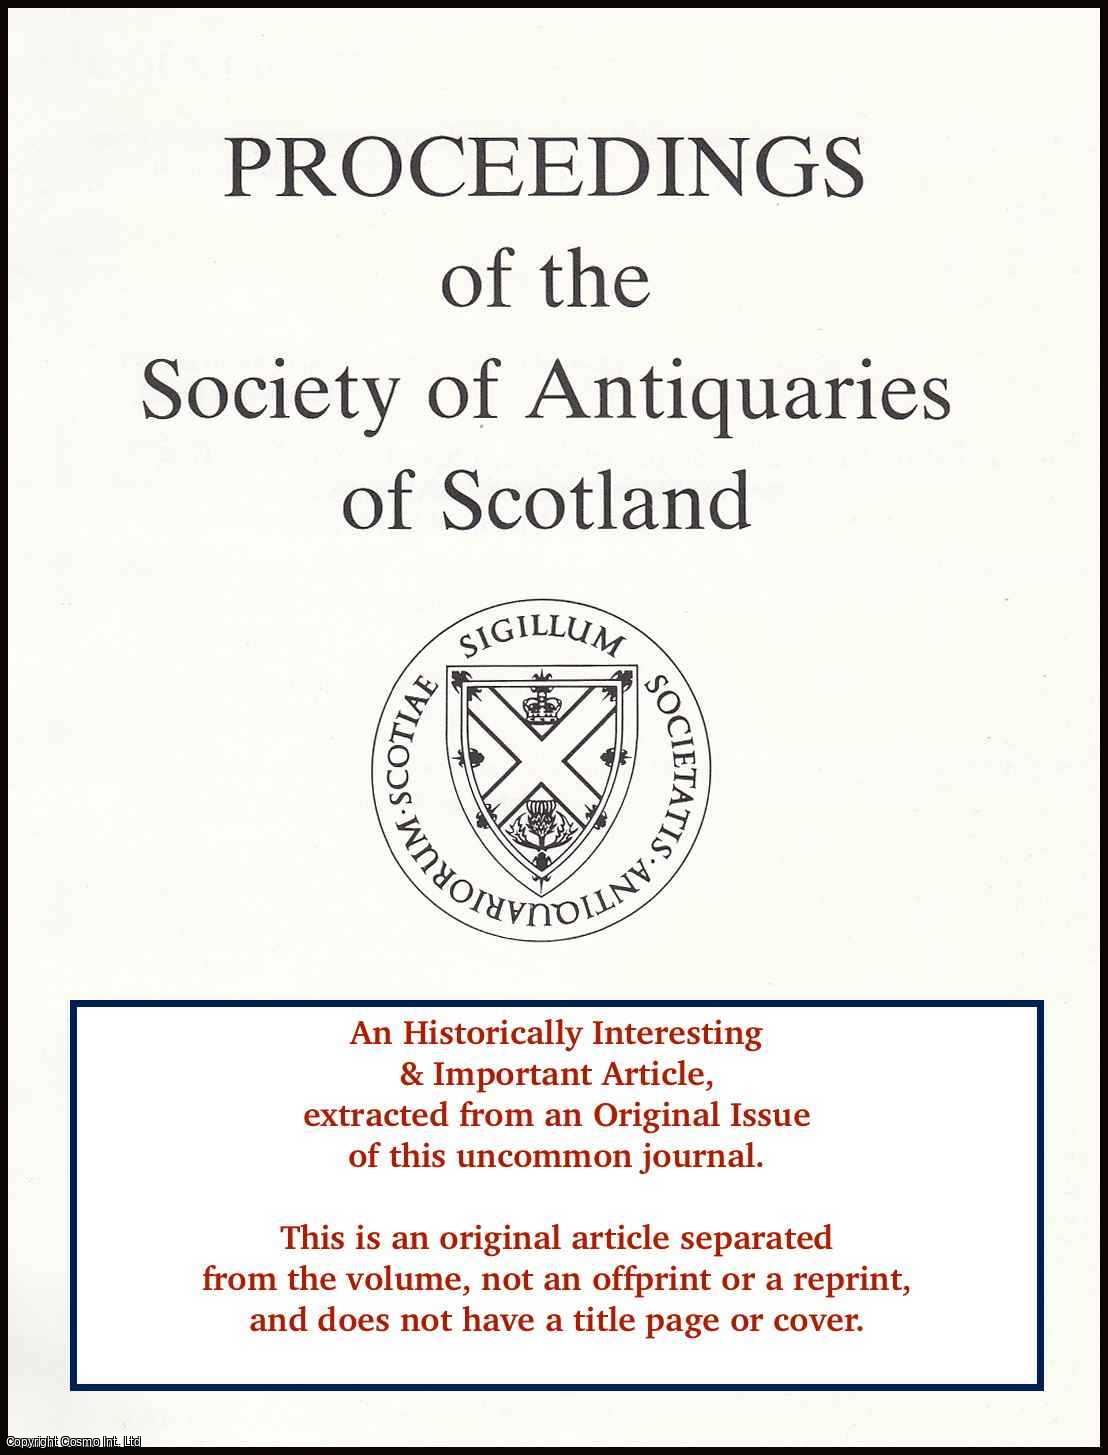 Alexander J. S. Brook - An Account of The Maces of The Universities of St. Andrews, Glasgow, Aberdeen, and Edinburgh, The College of Justice, The City of Edinburgh. An original article from the Proceedings of the Society of Antiquaries of Scotland, 1891-92.